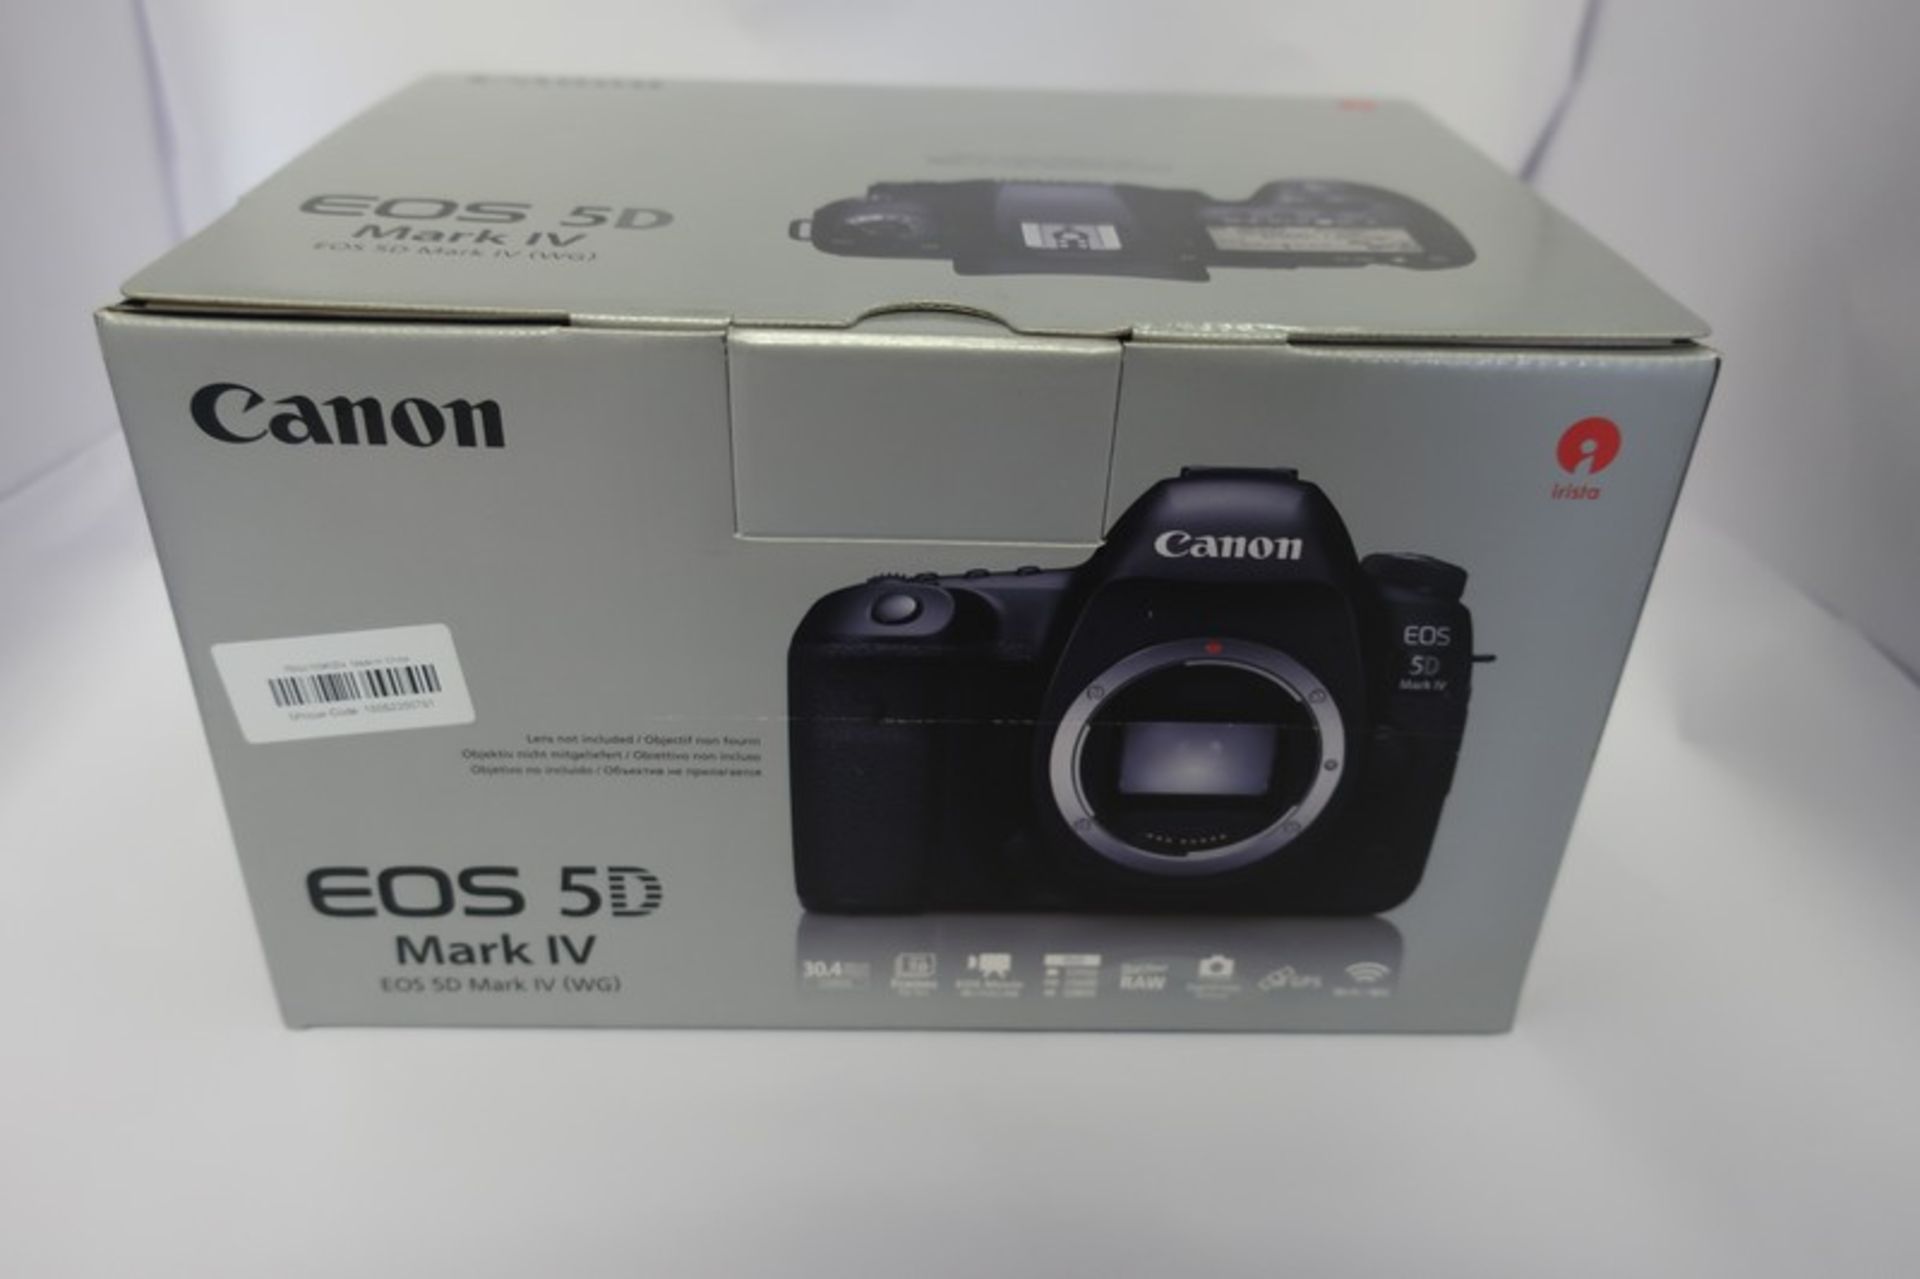 A boxed as new Canon EOS 5D Mark IV (WG) Digital SLR Camera (Body only).